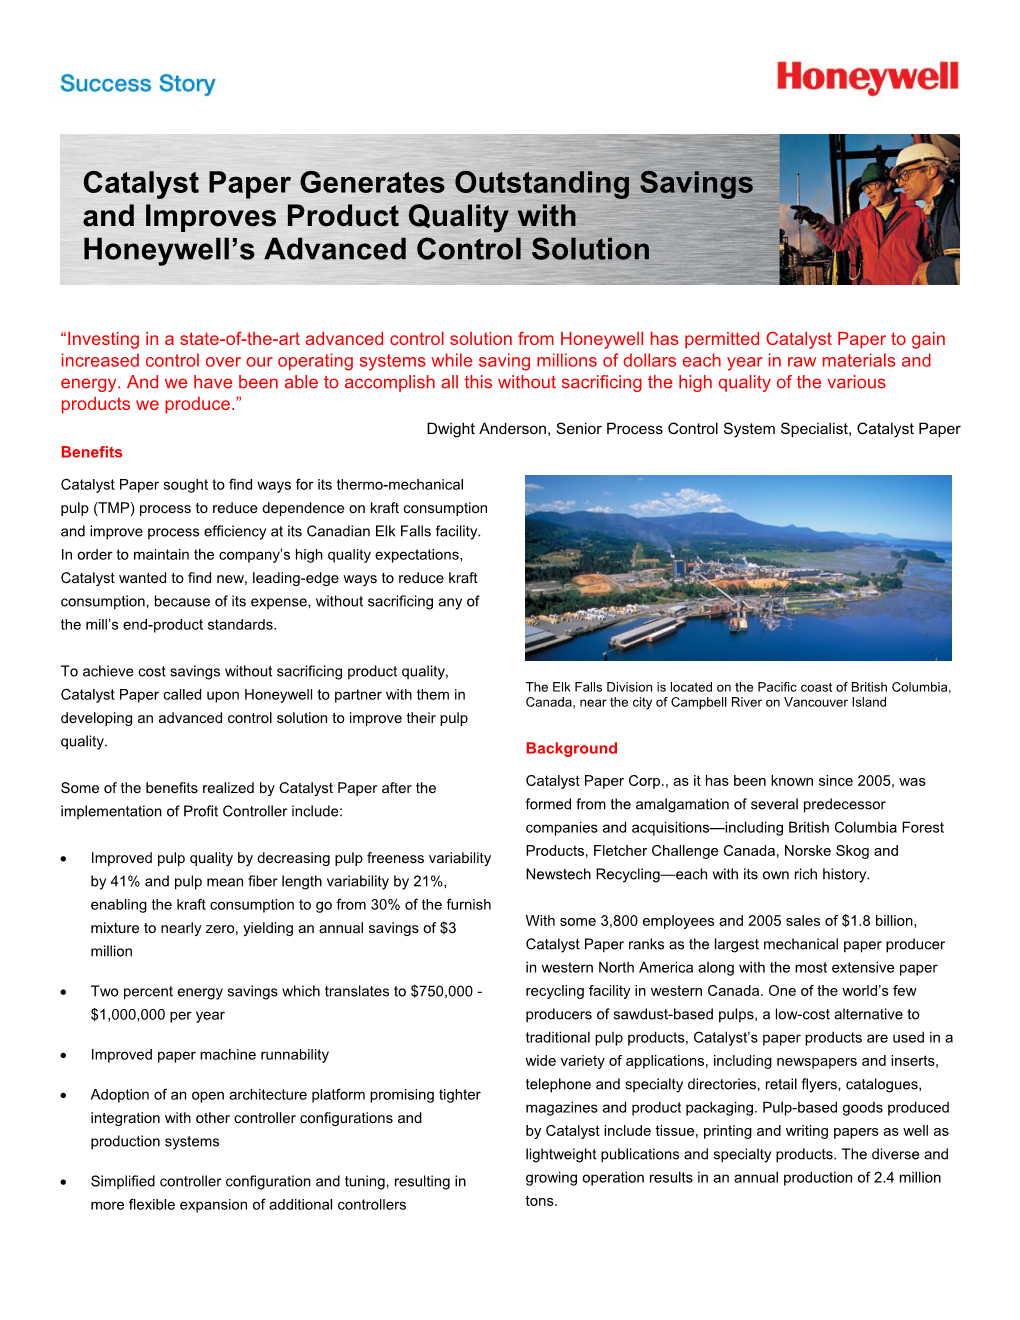 Catalyst Paper Generates Outstanding Savings and Improves Product Quality with Honeywell’S Advanced Control Solution